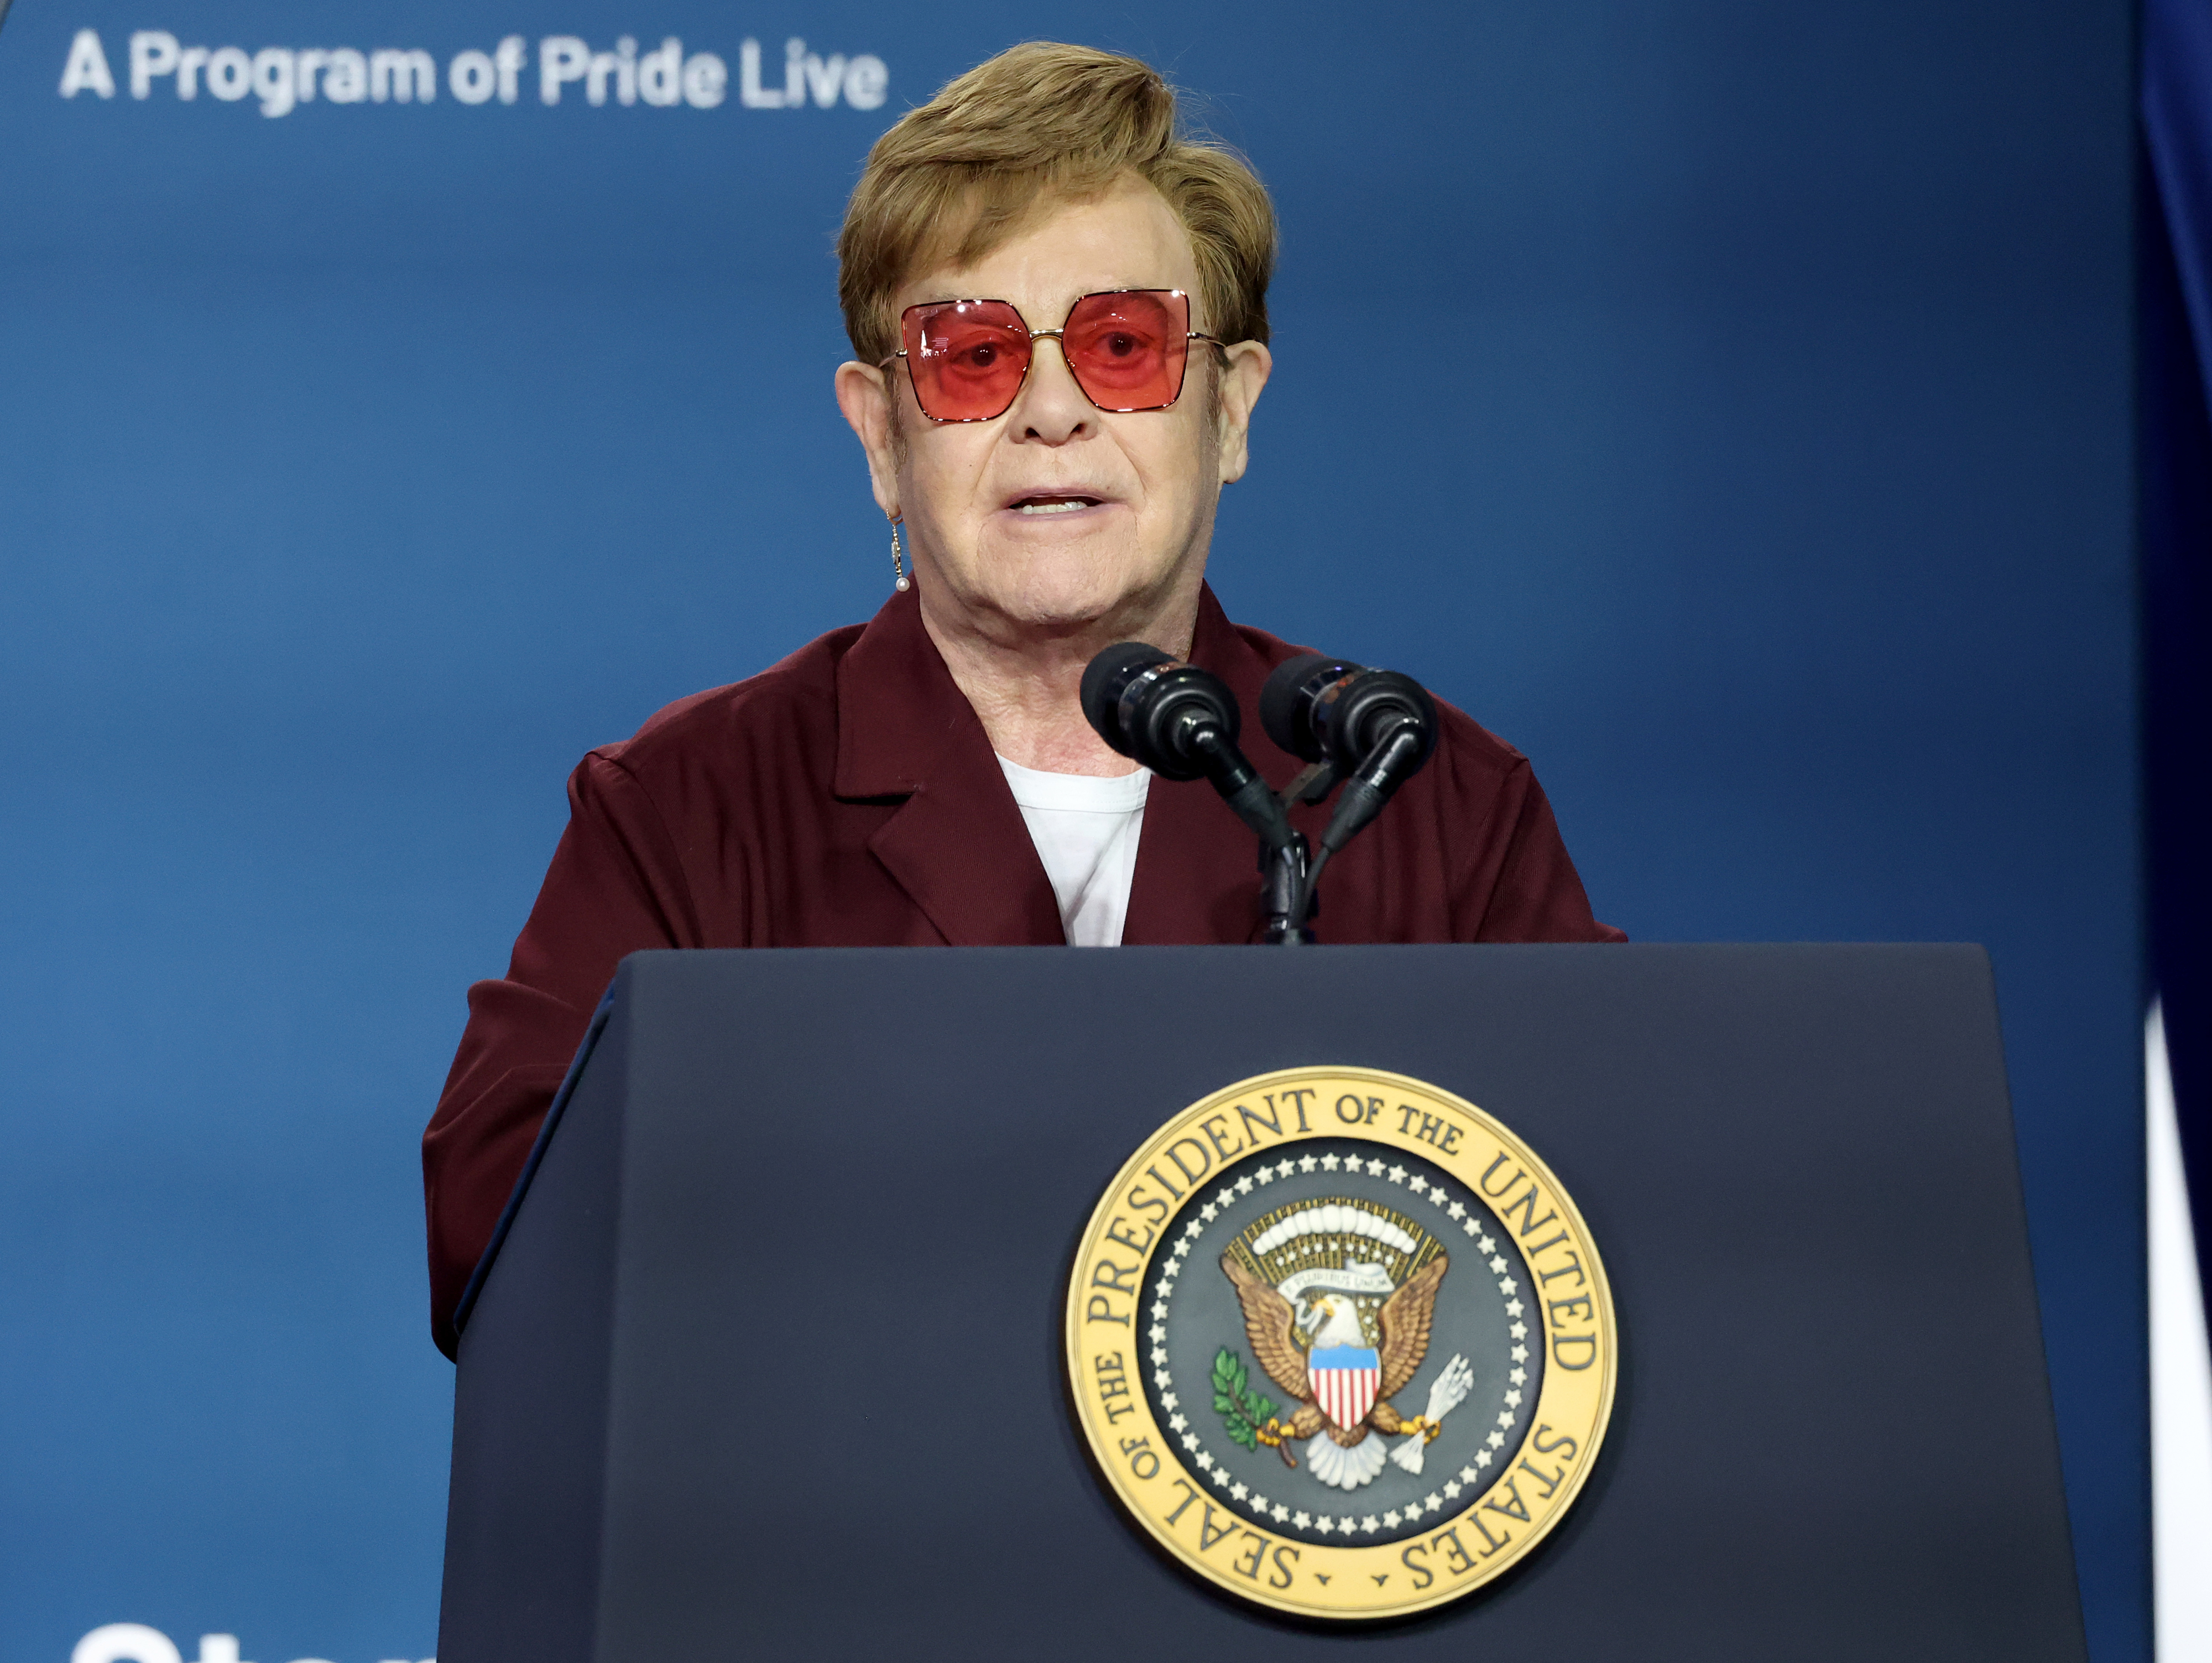 Elton John speaks at a podium with the emblem of the President of the United States, wearing red-tinted glasses and a dark suit